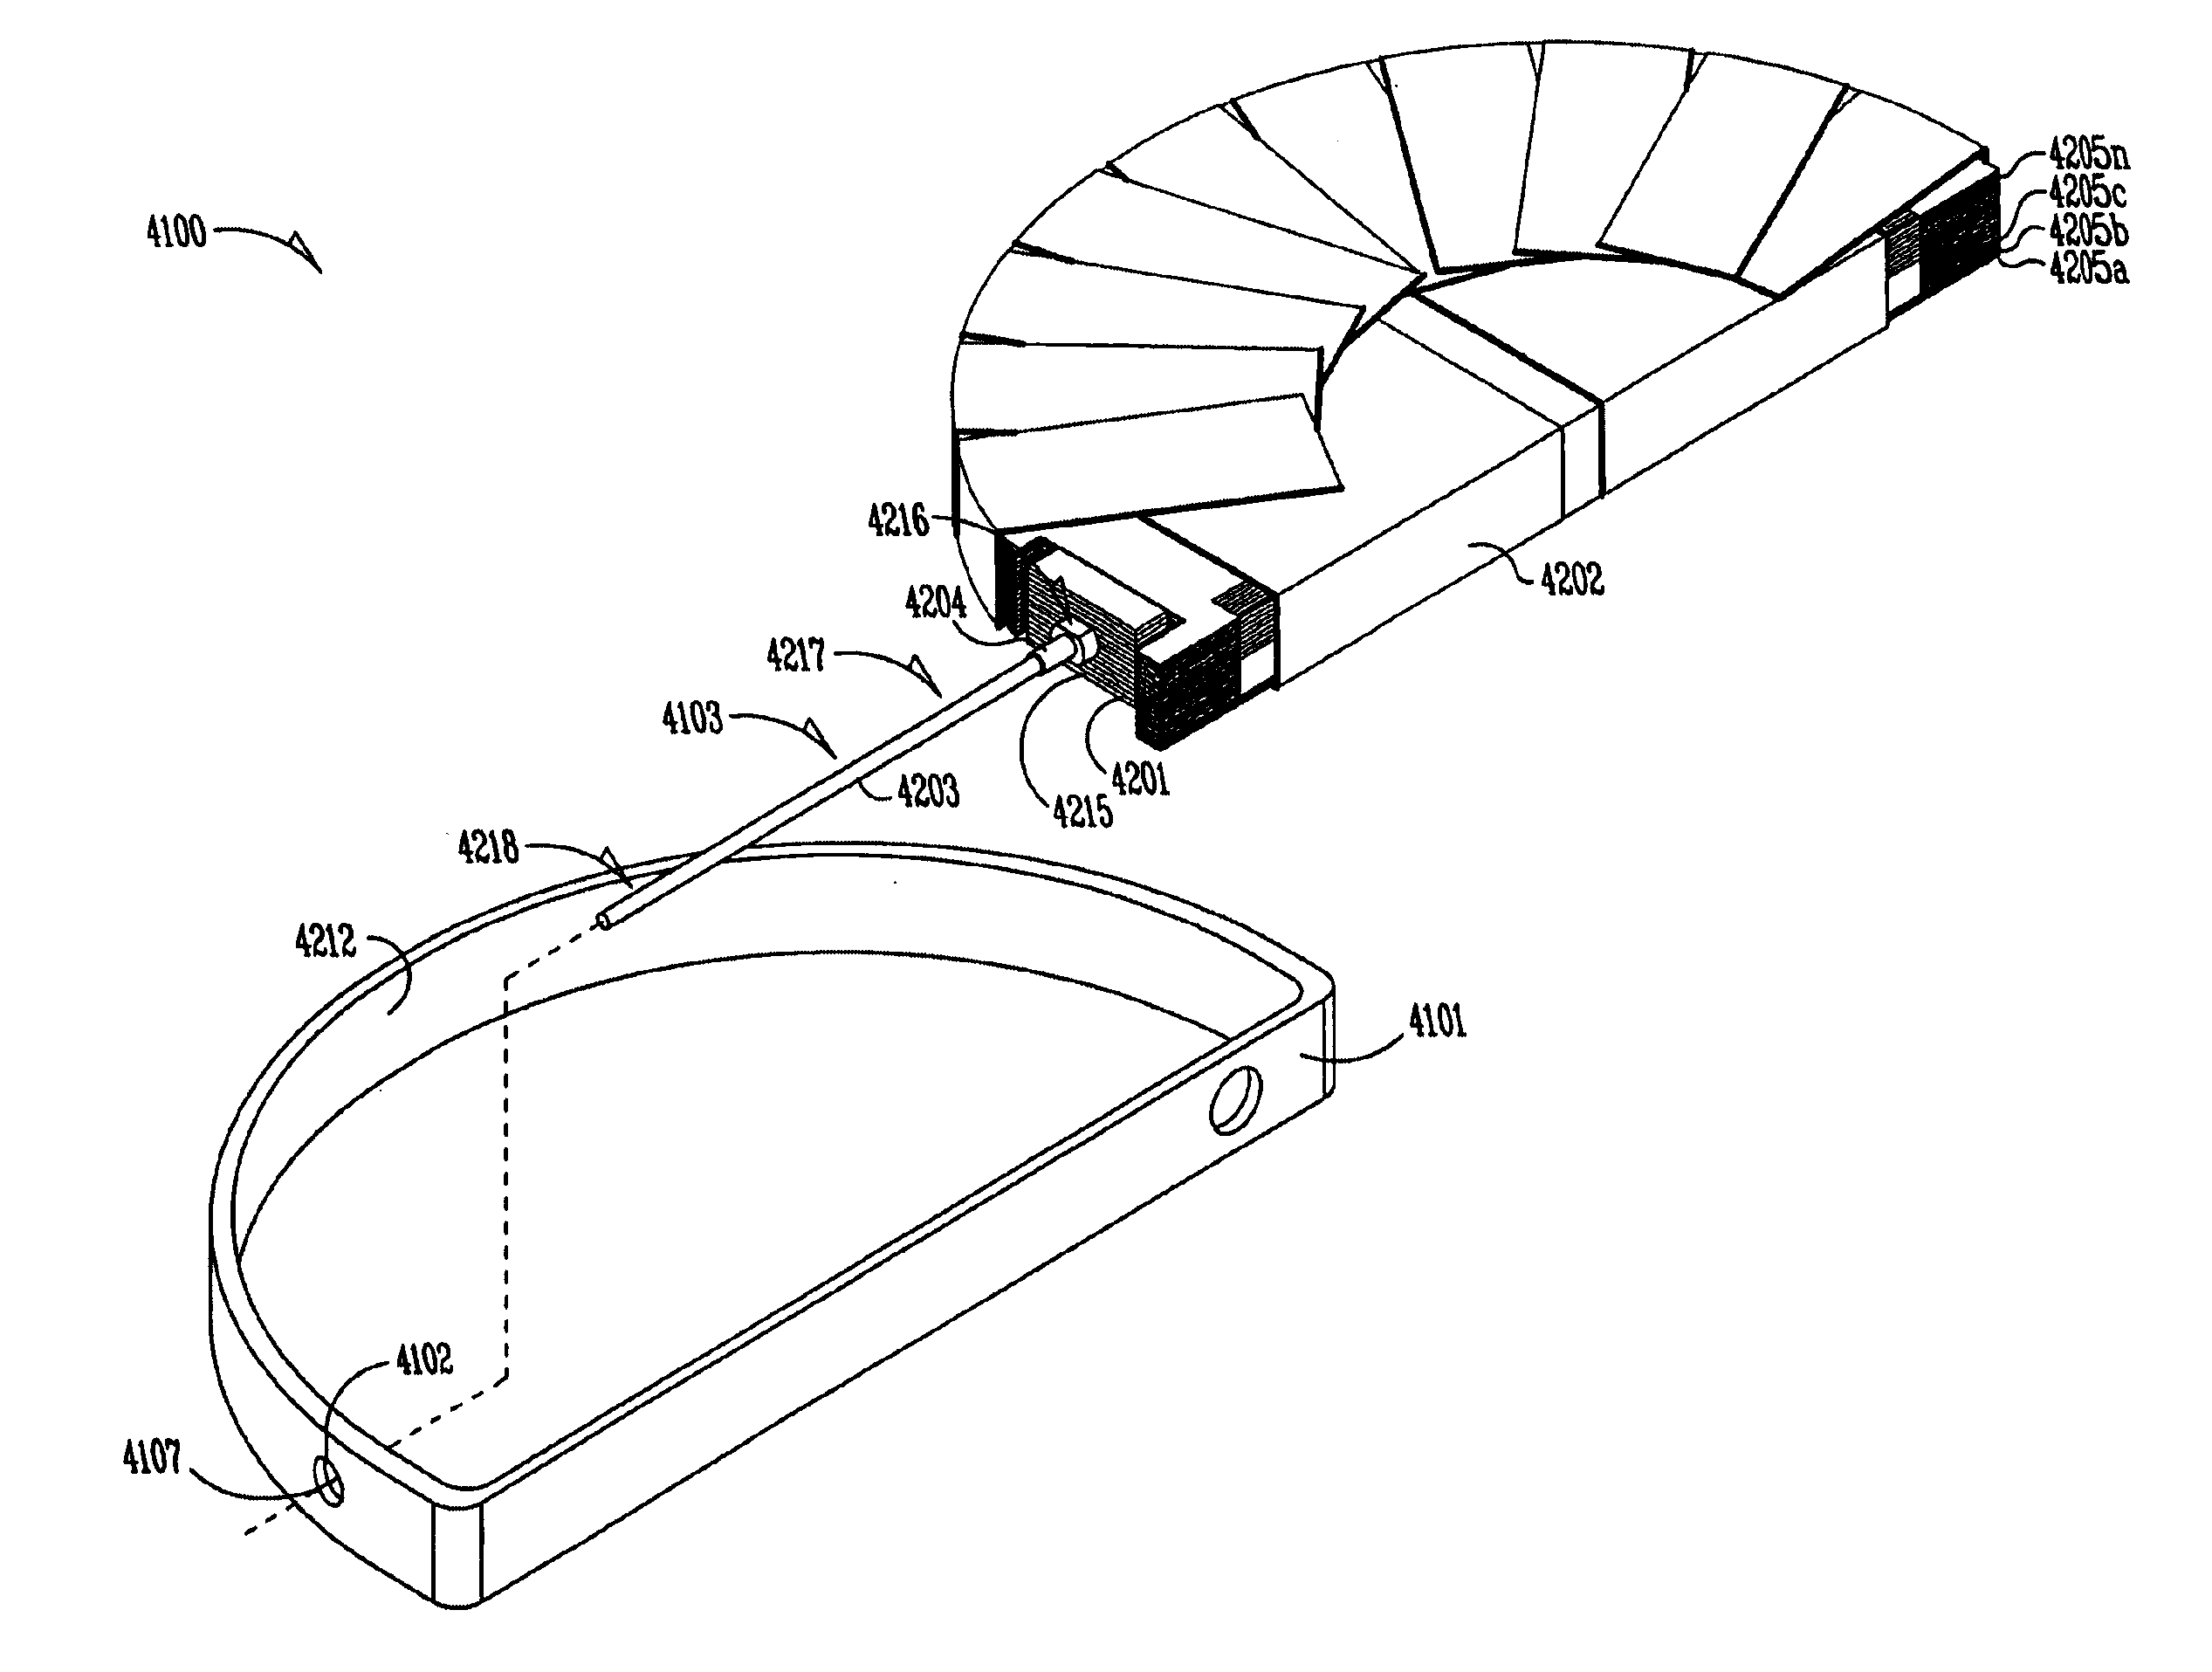 Flat capacitor for an implantable medical device